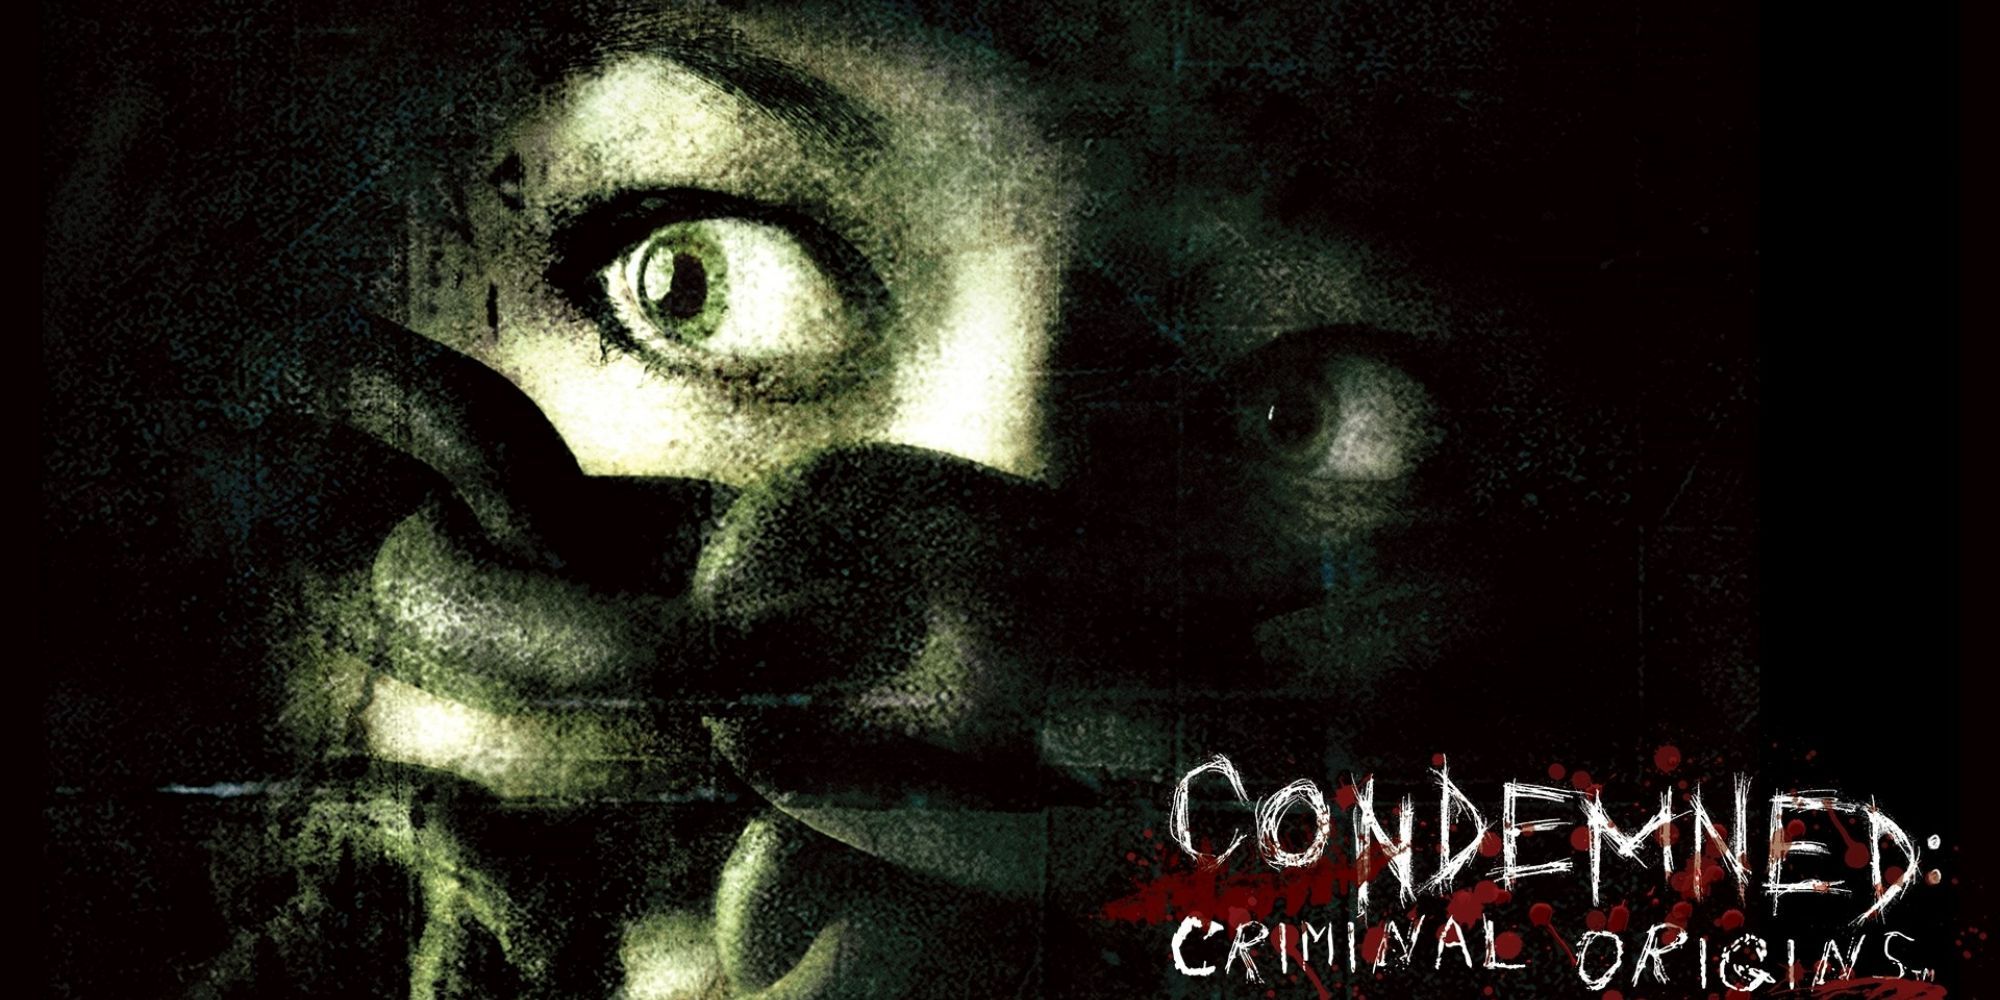 The cover of Condemned: Criminal Origins featuring a woman in chains